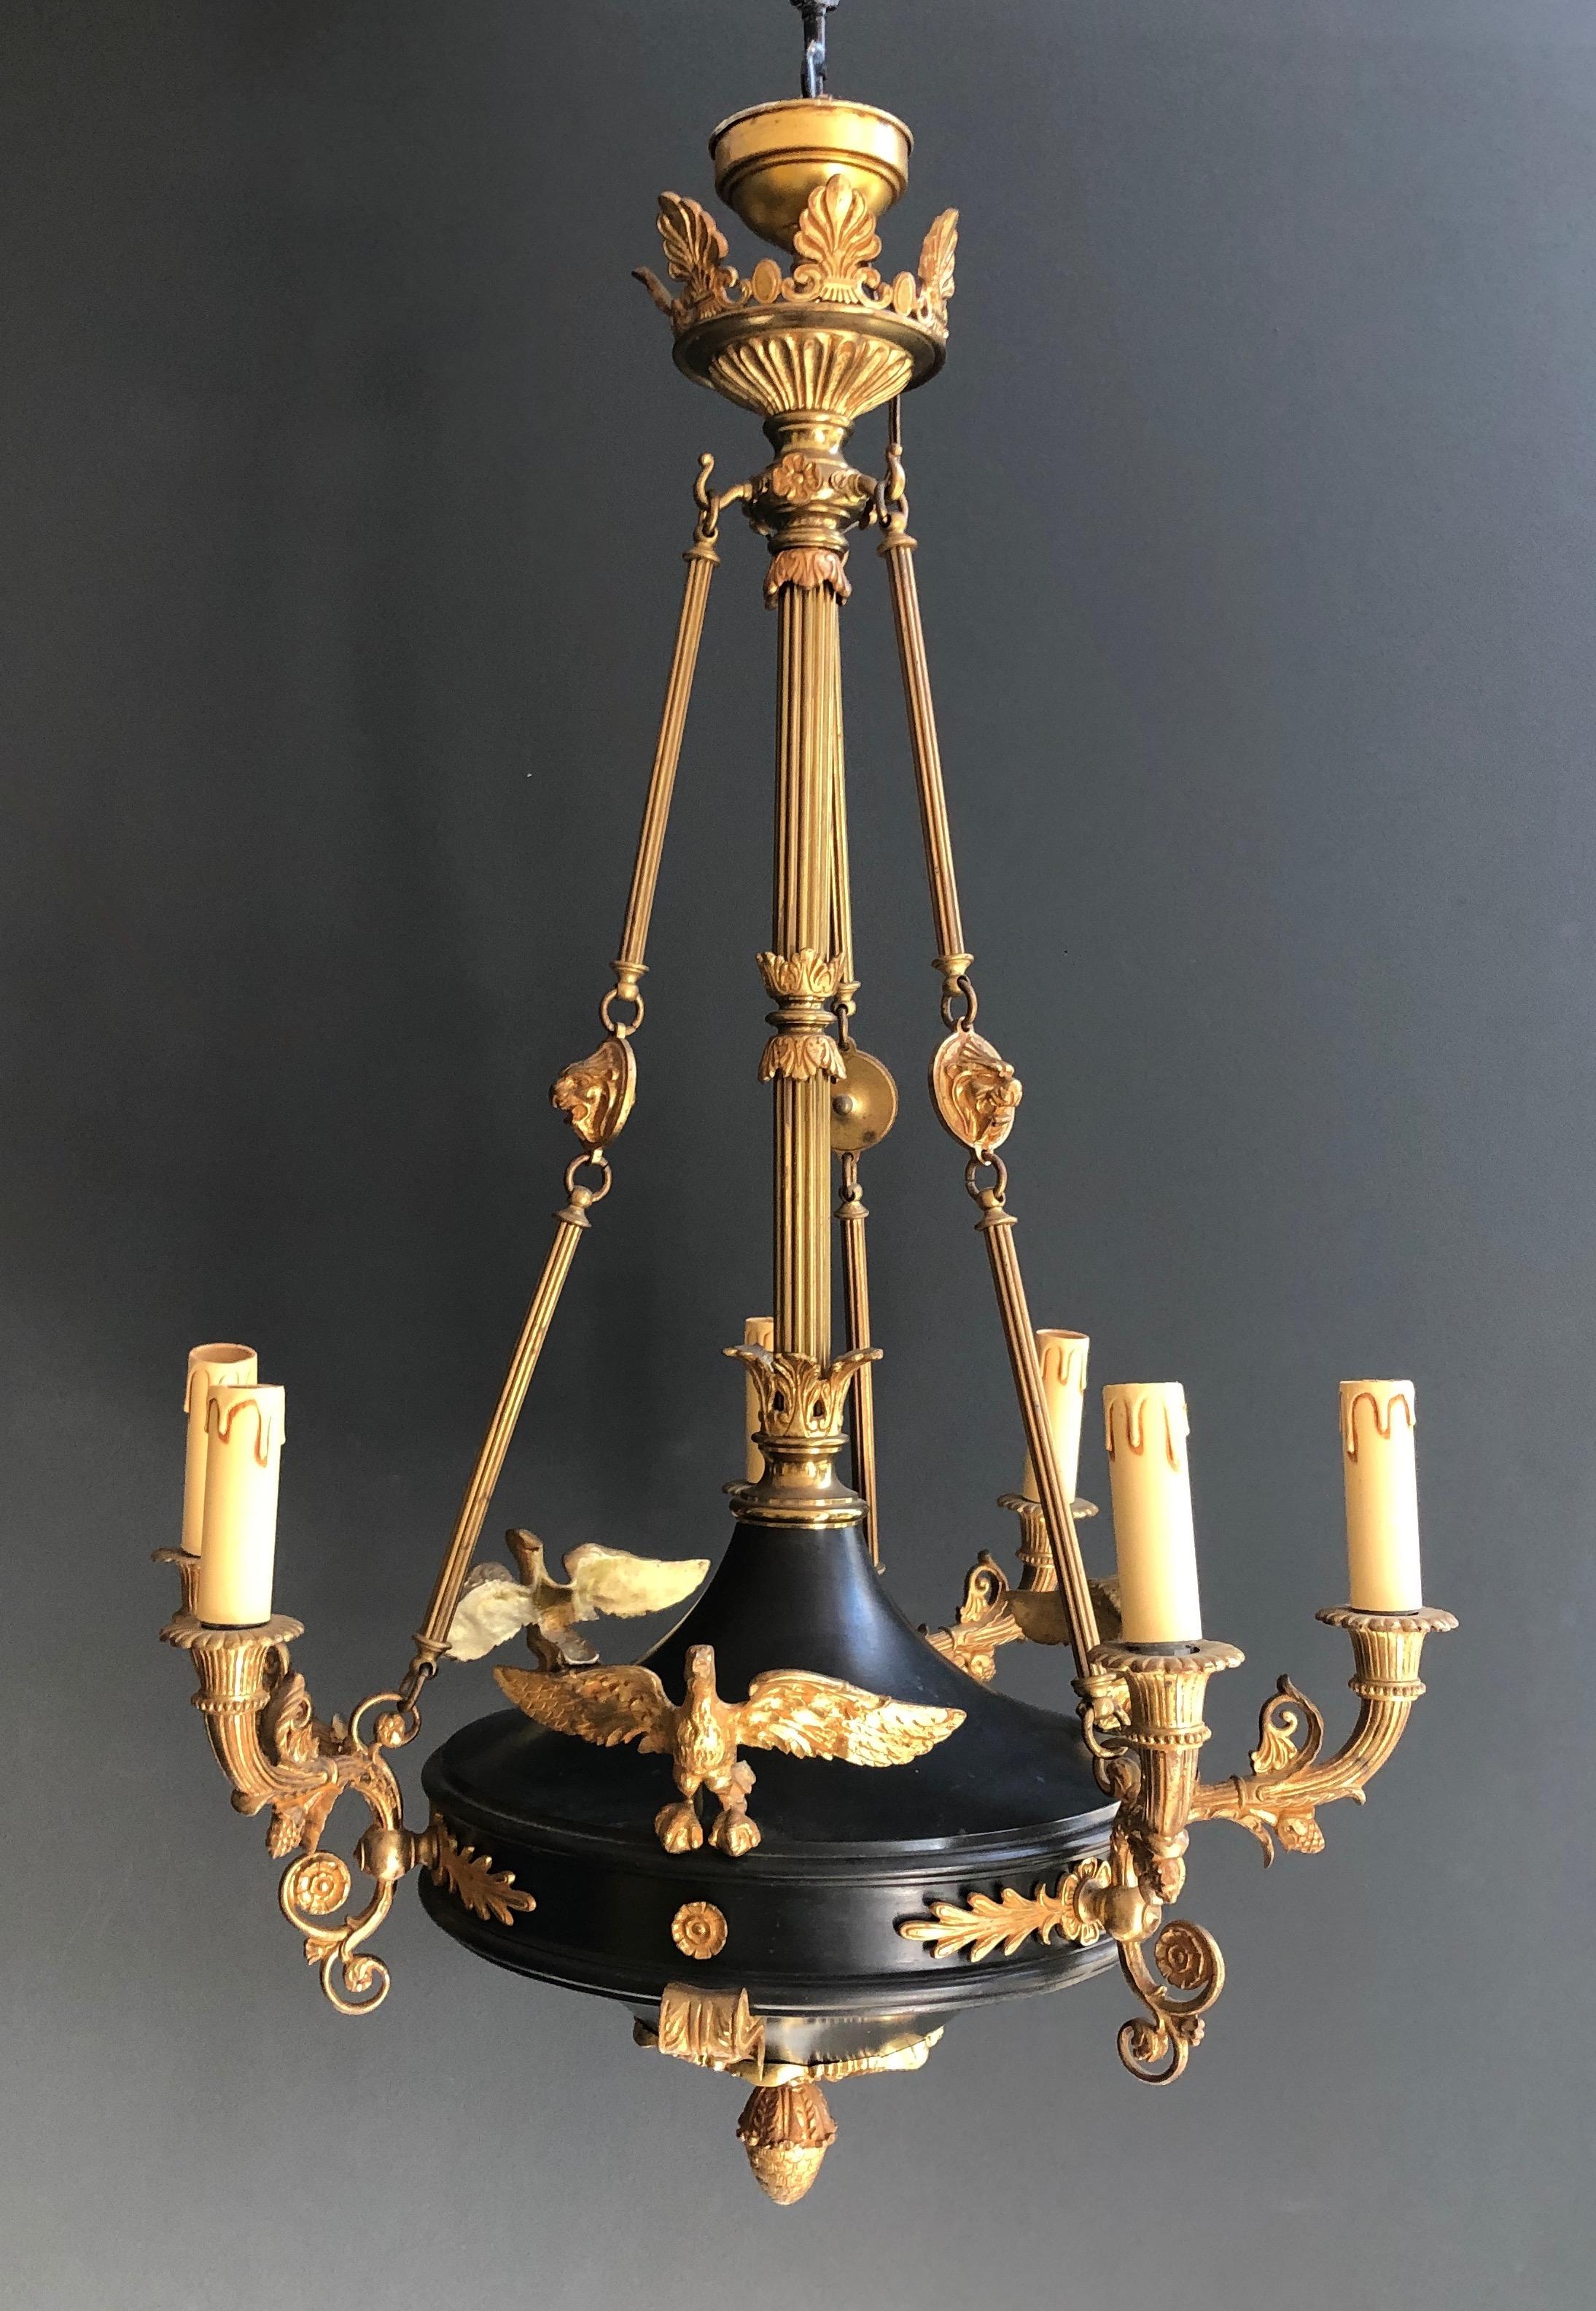 This beautiful large Empire style chandelier is made of green sheet metal and gilded bronzes decorated with ornaments, palm leaves and golden eagles. This is a French work. circa 1920.